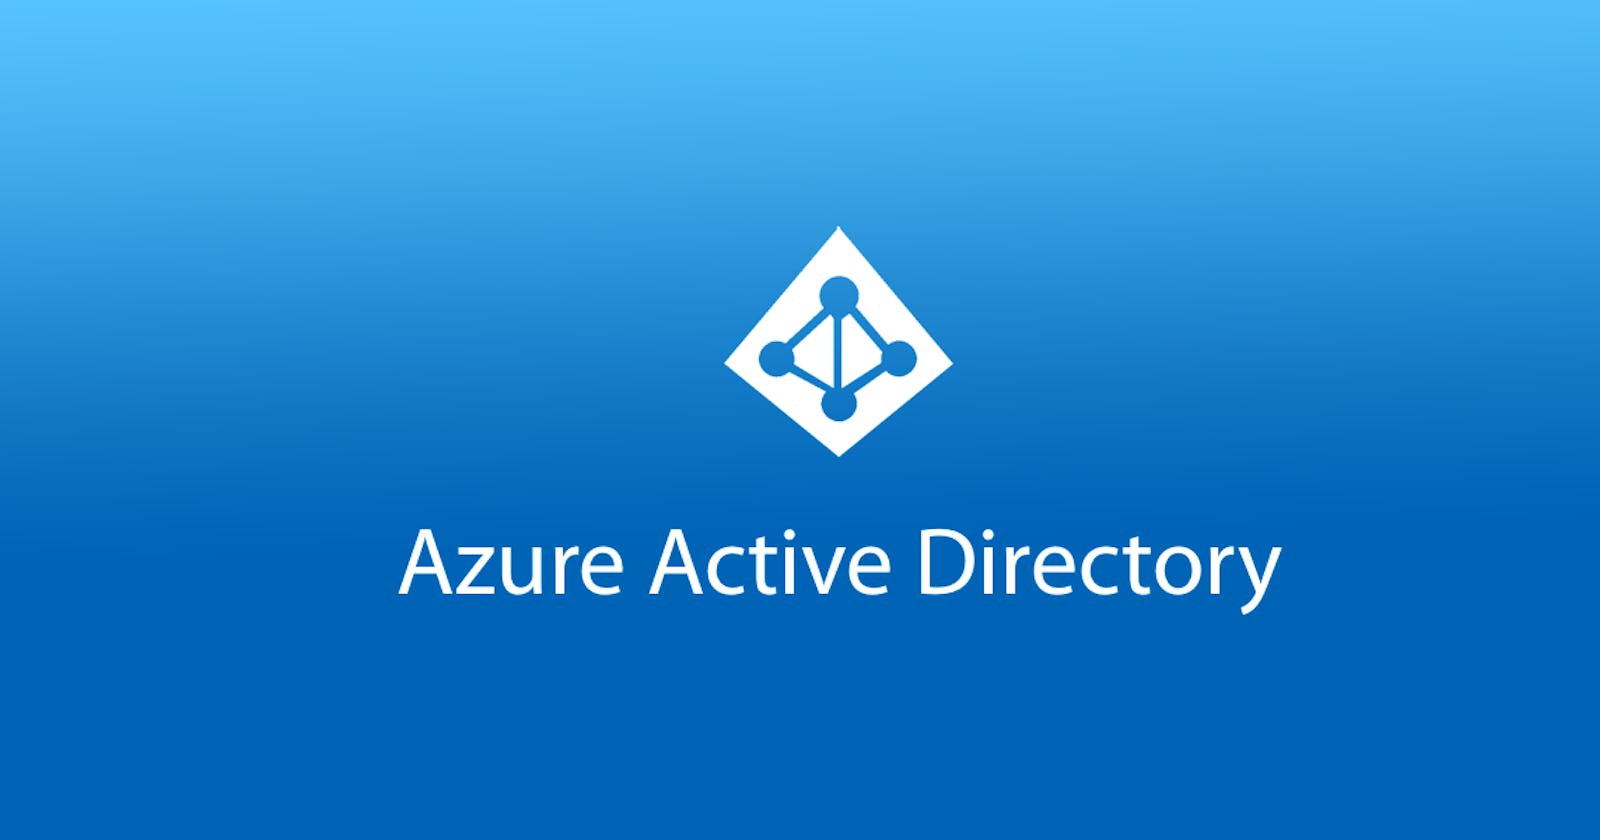 Upgrade Azure AD Connect